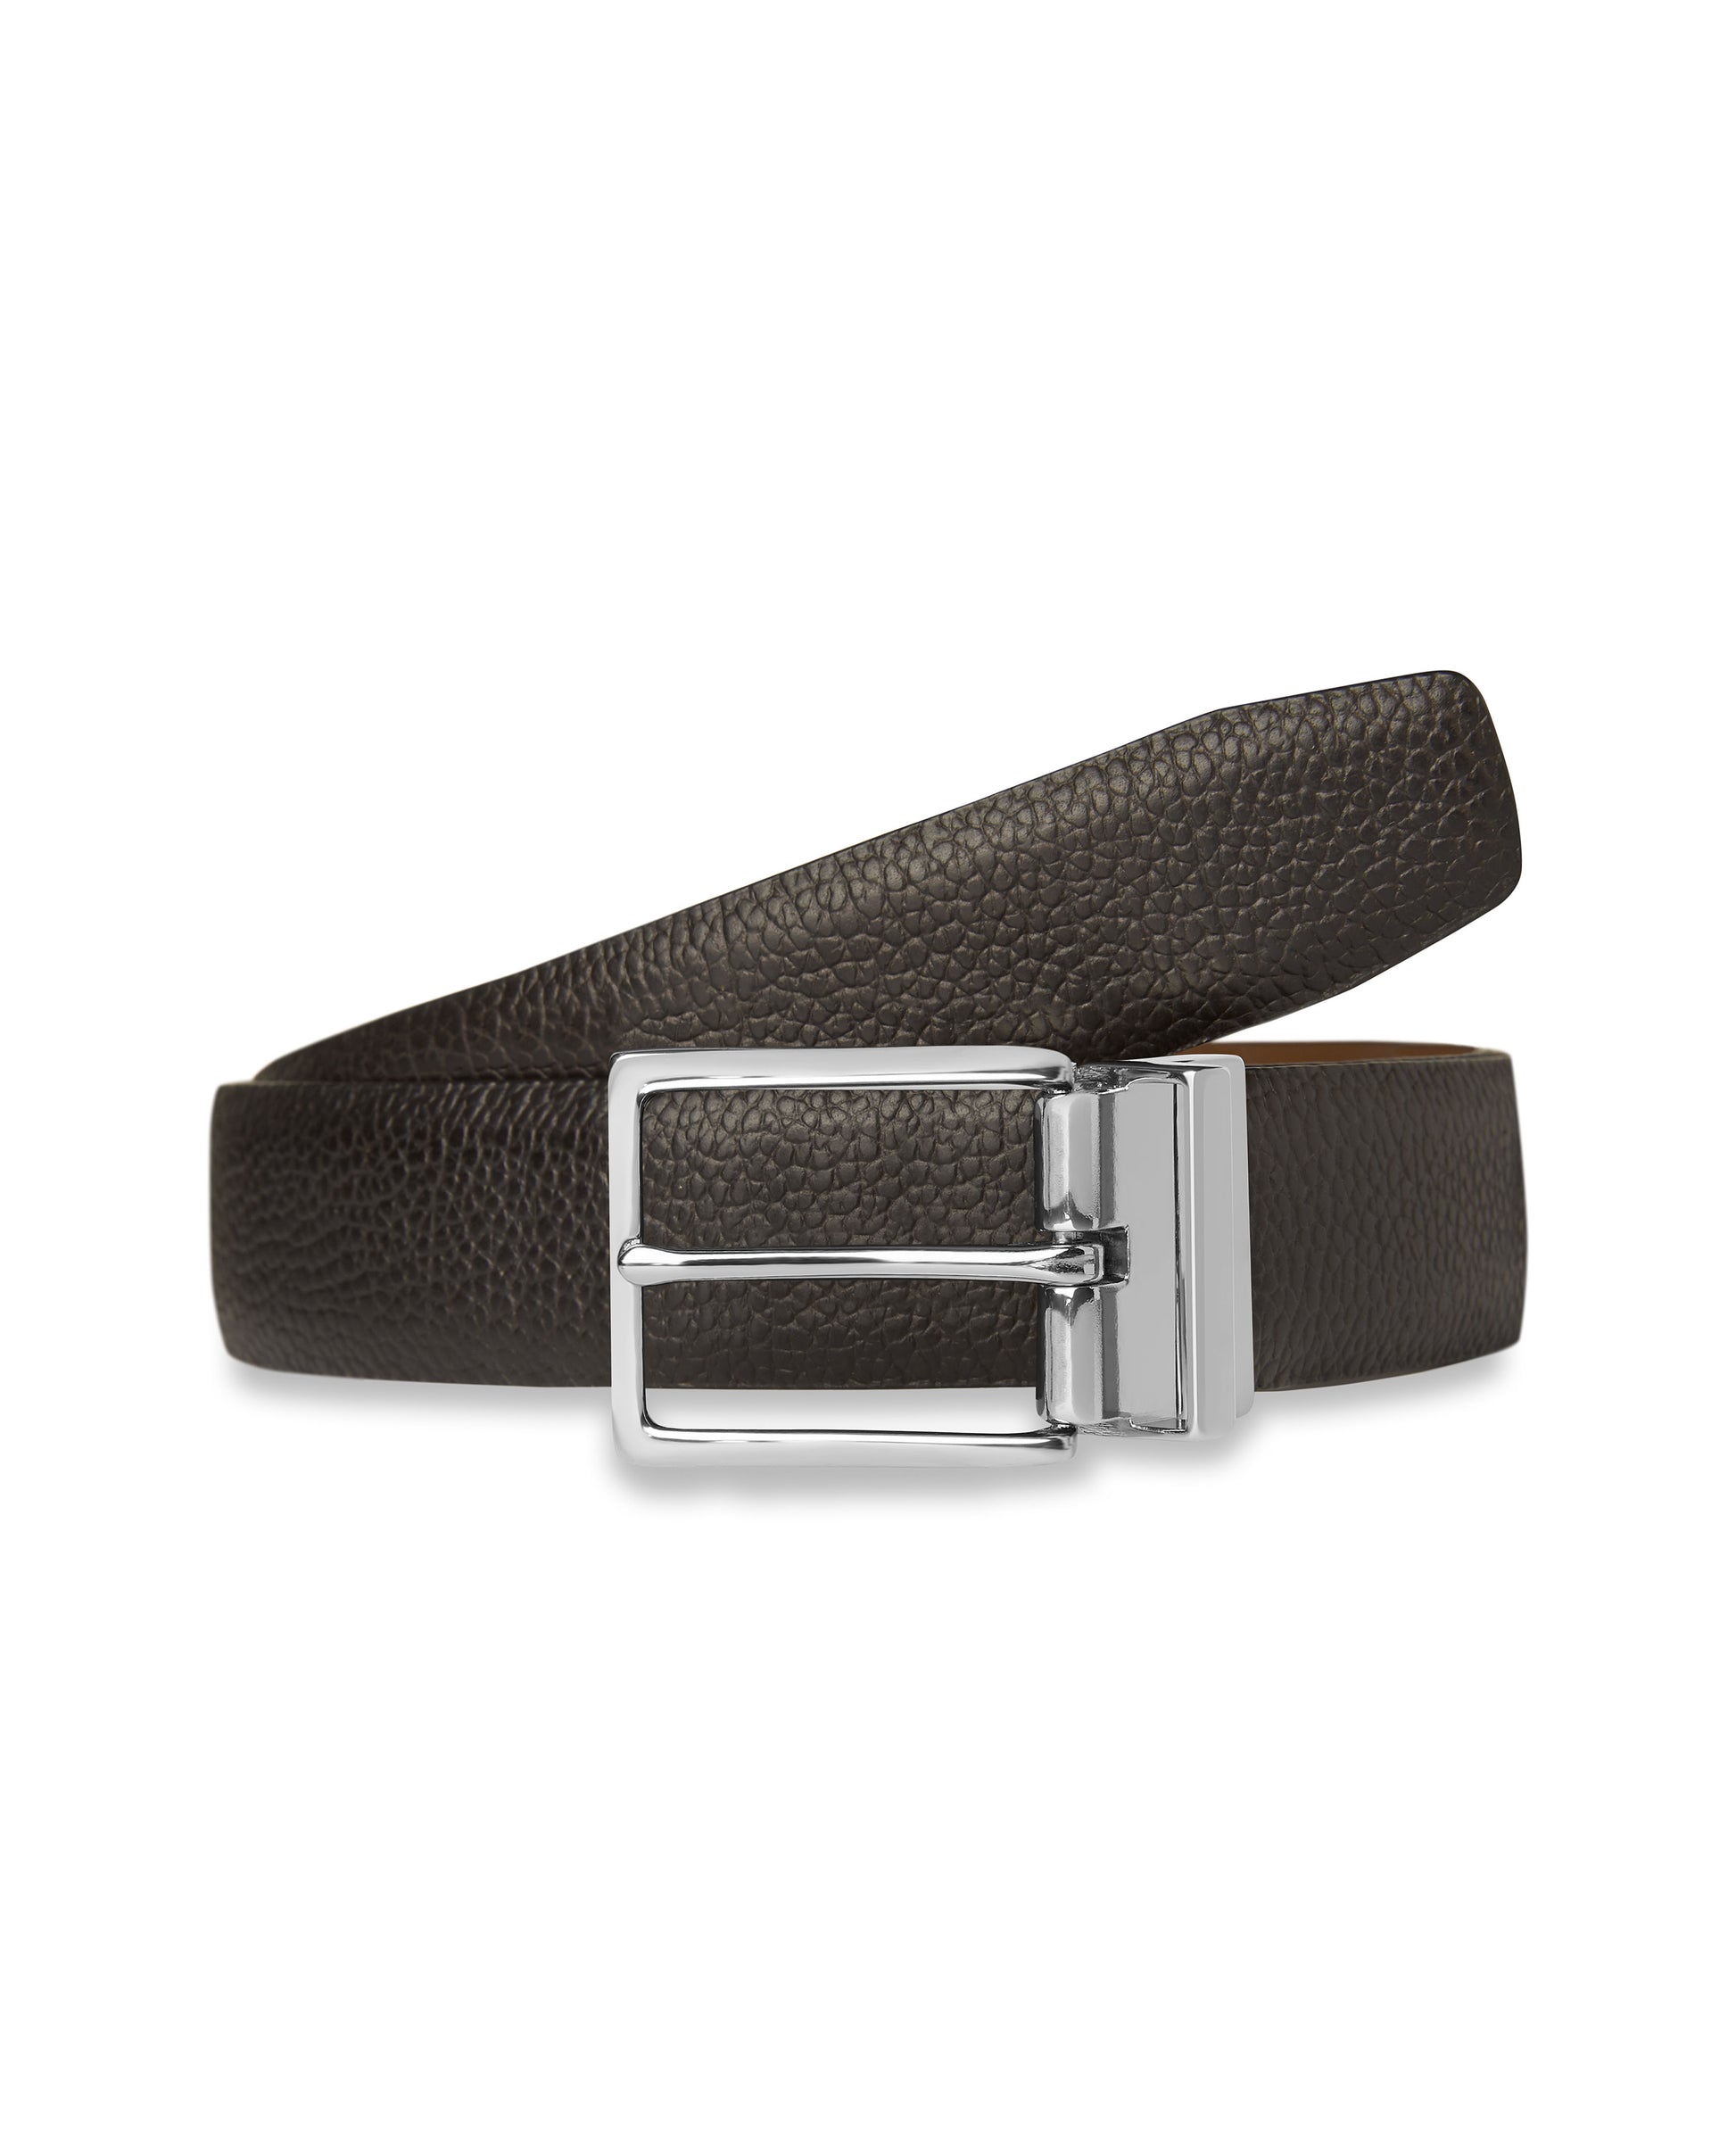 Image 1 of Reversible Textured Black and Brown Belt